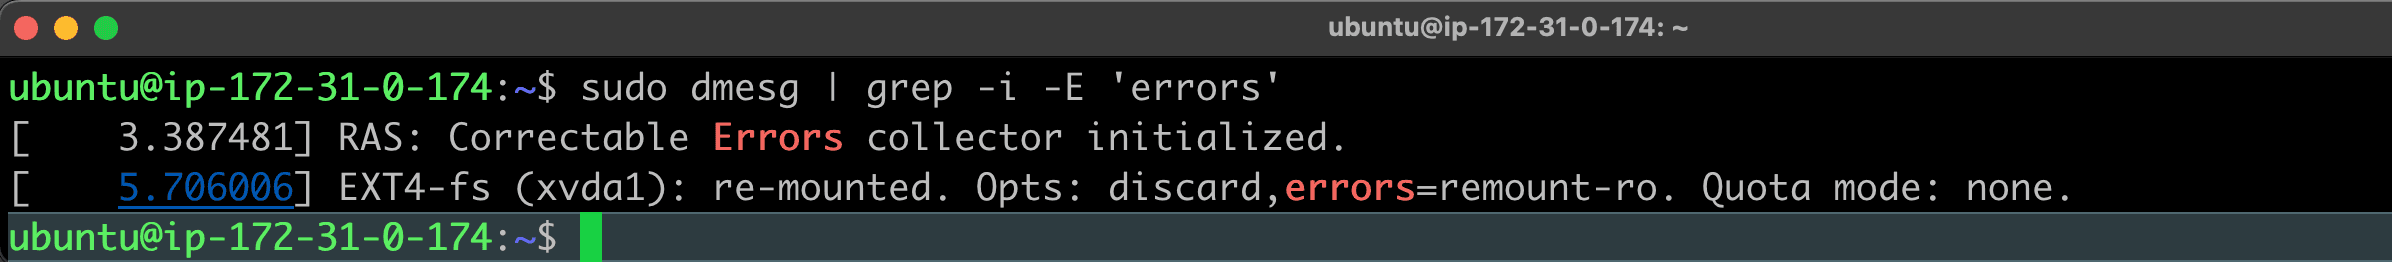 Error output from dmesg command